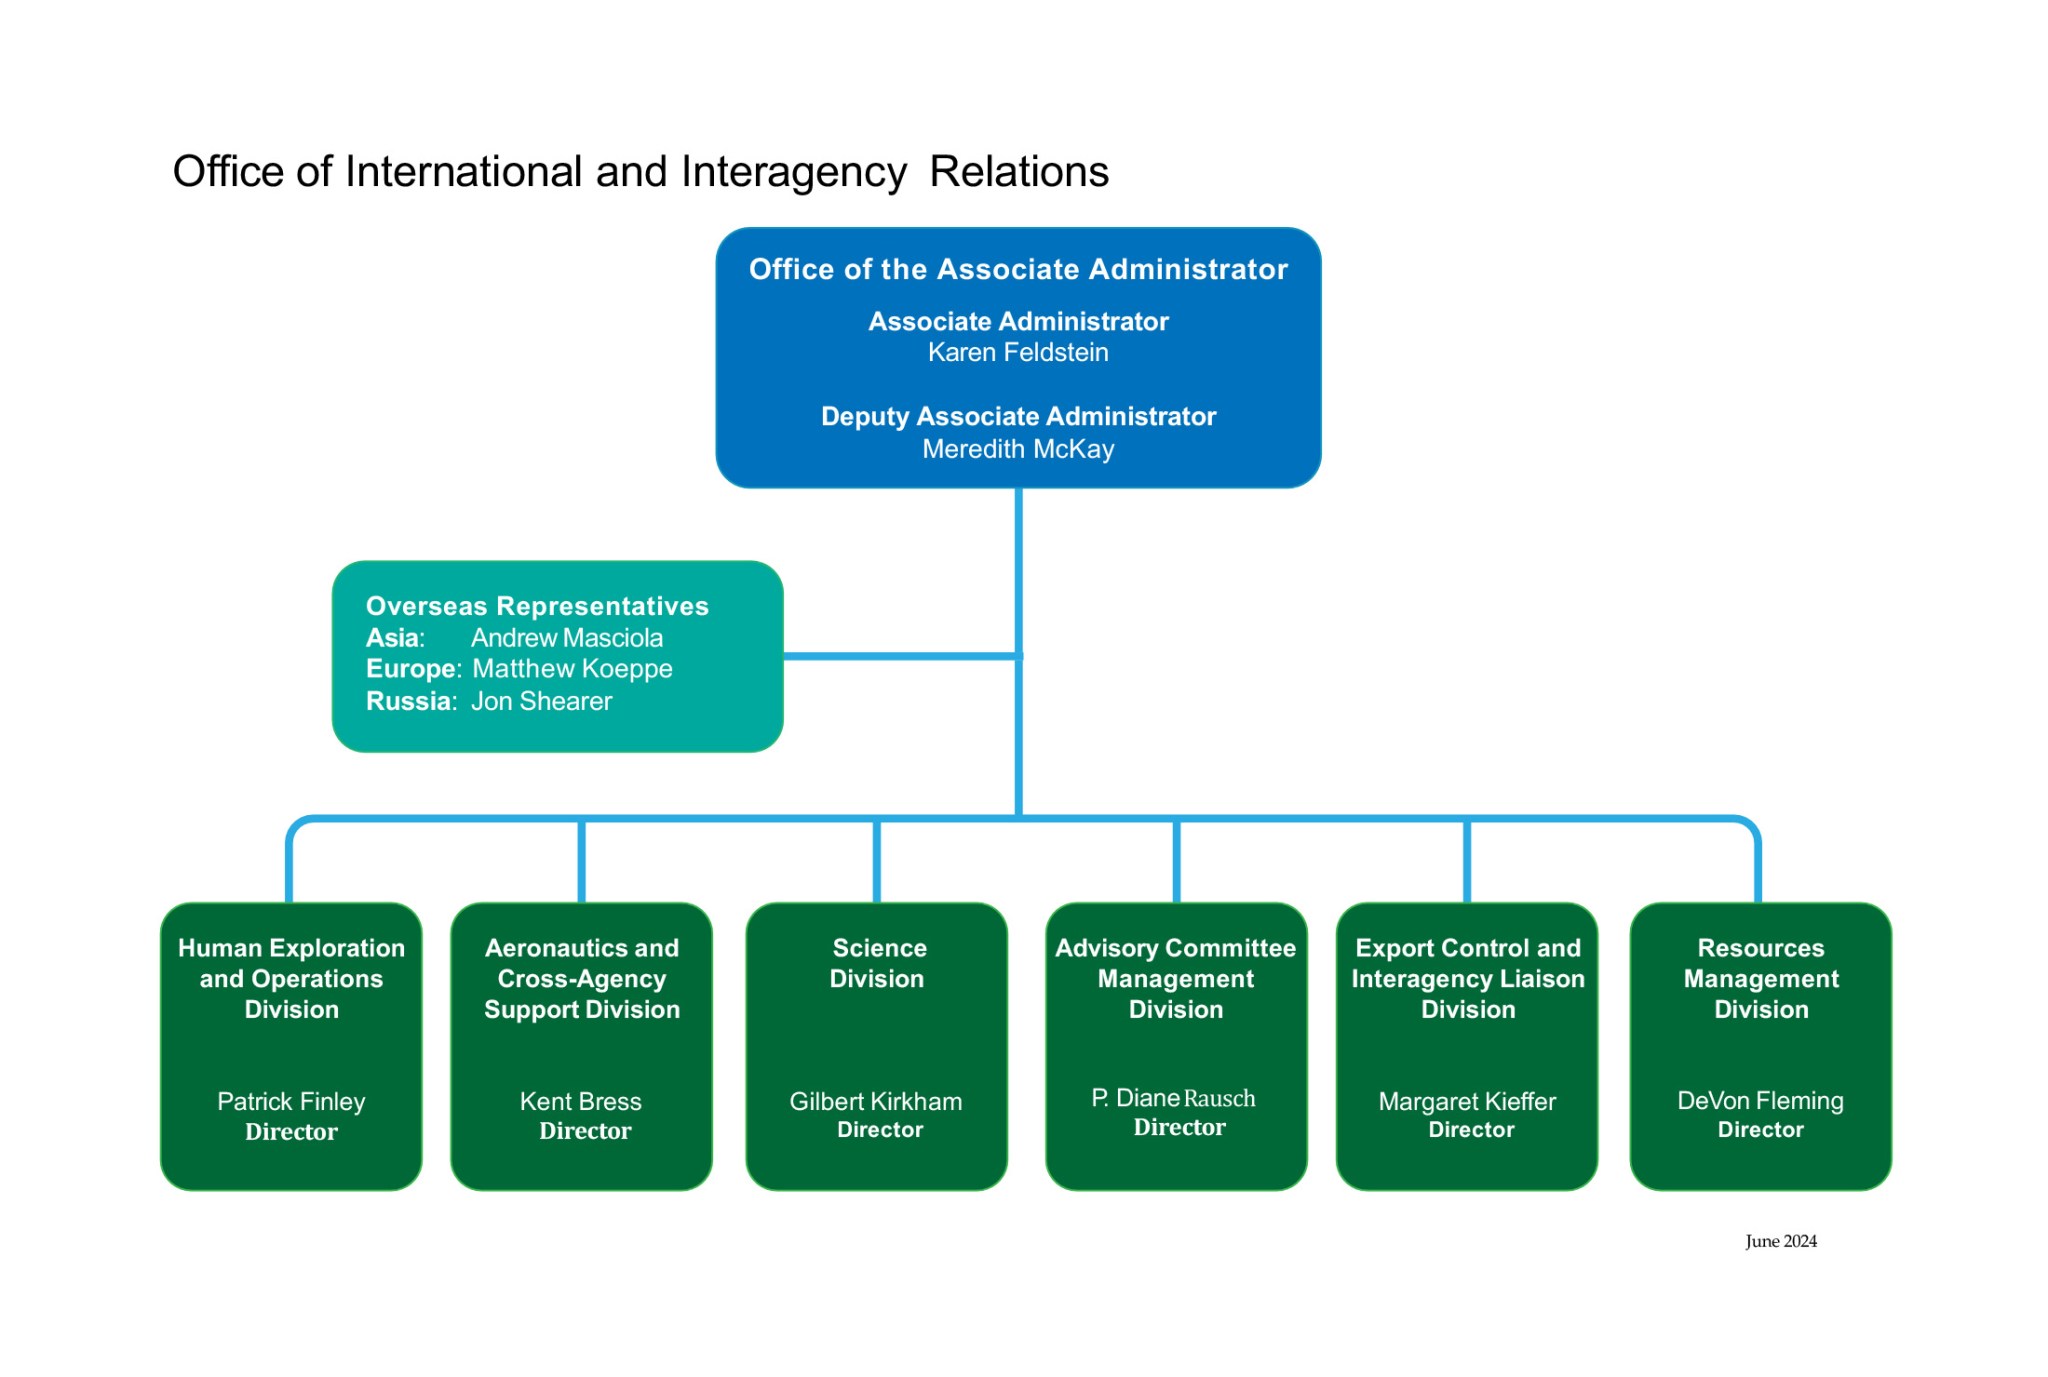 Office of International and Interagency Relations organizational chart